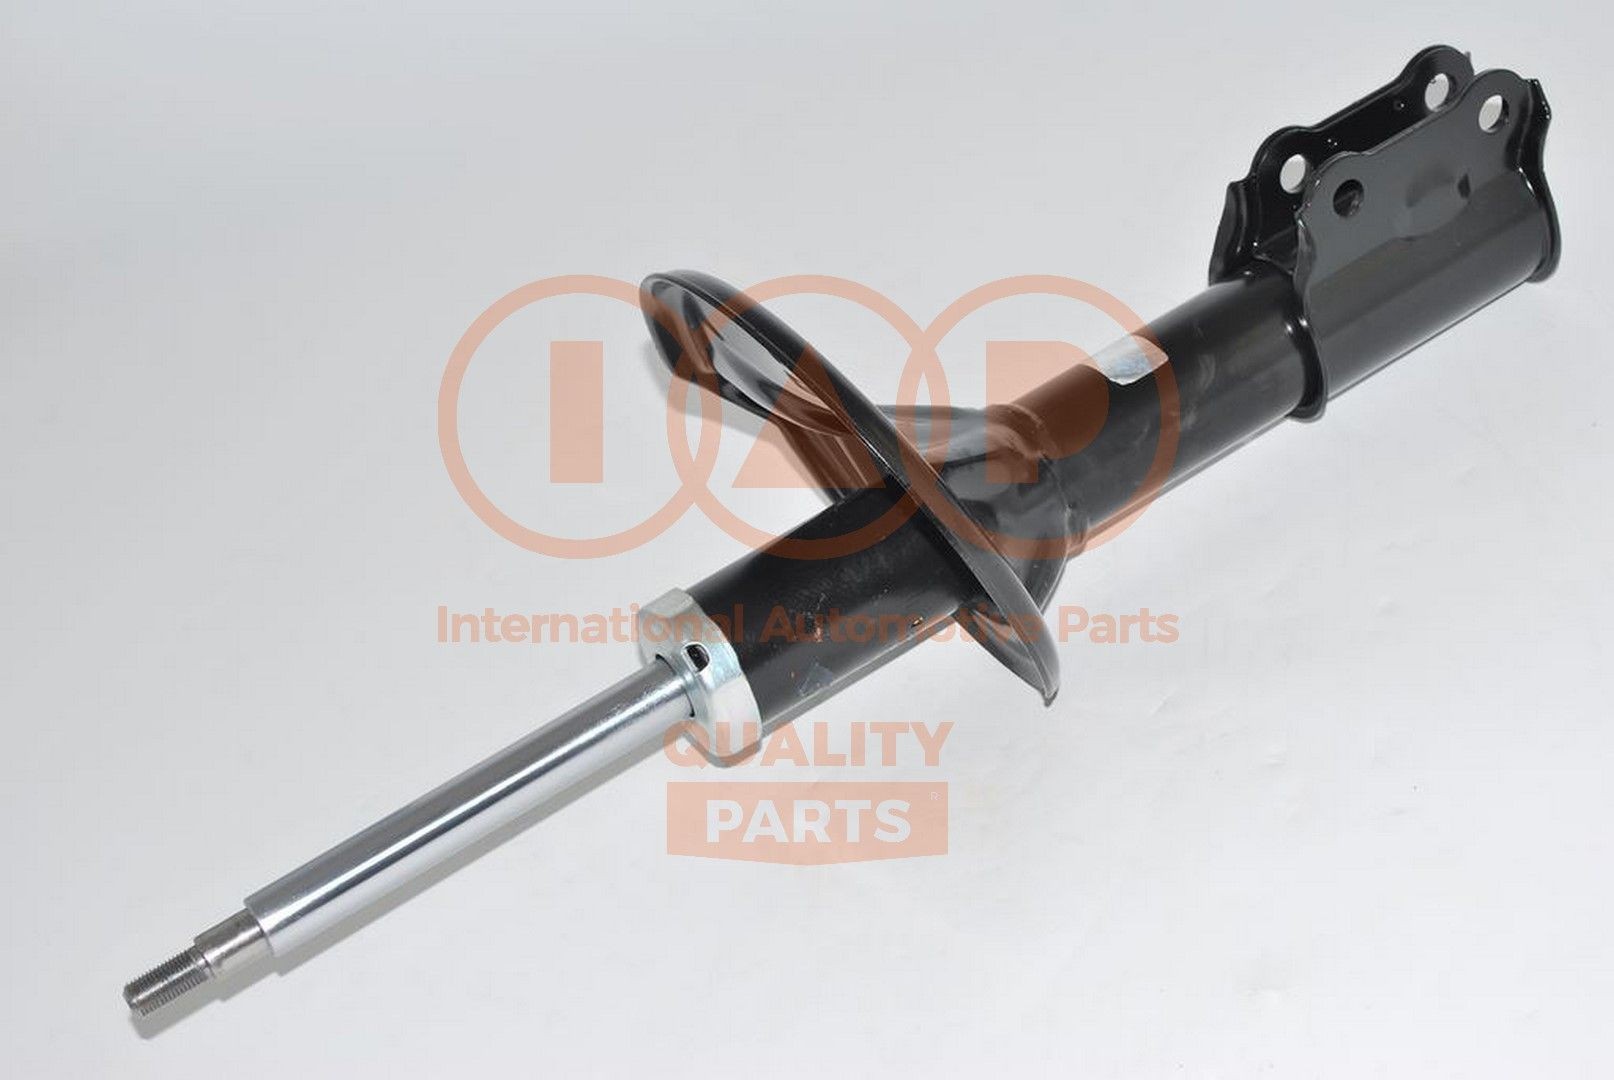 IAP QUALITY PARTS 504-07022A Shock absorber 54650-28012